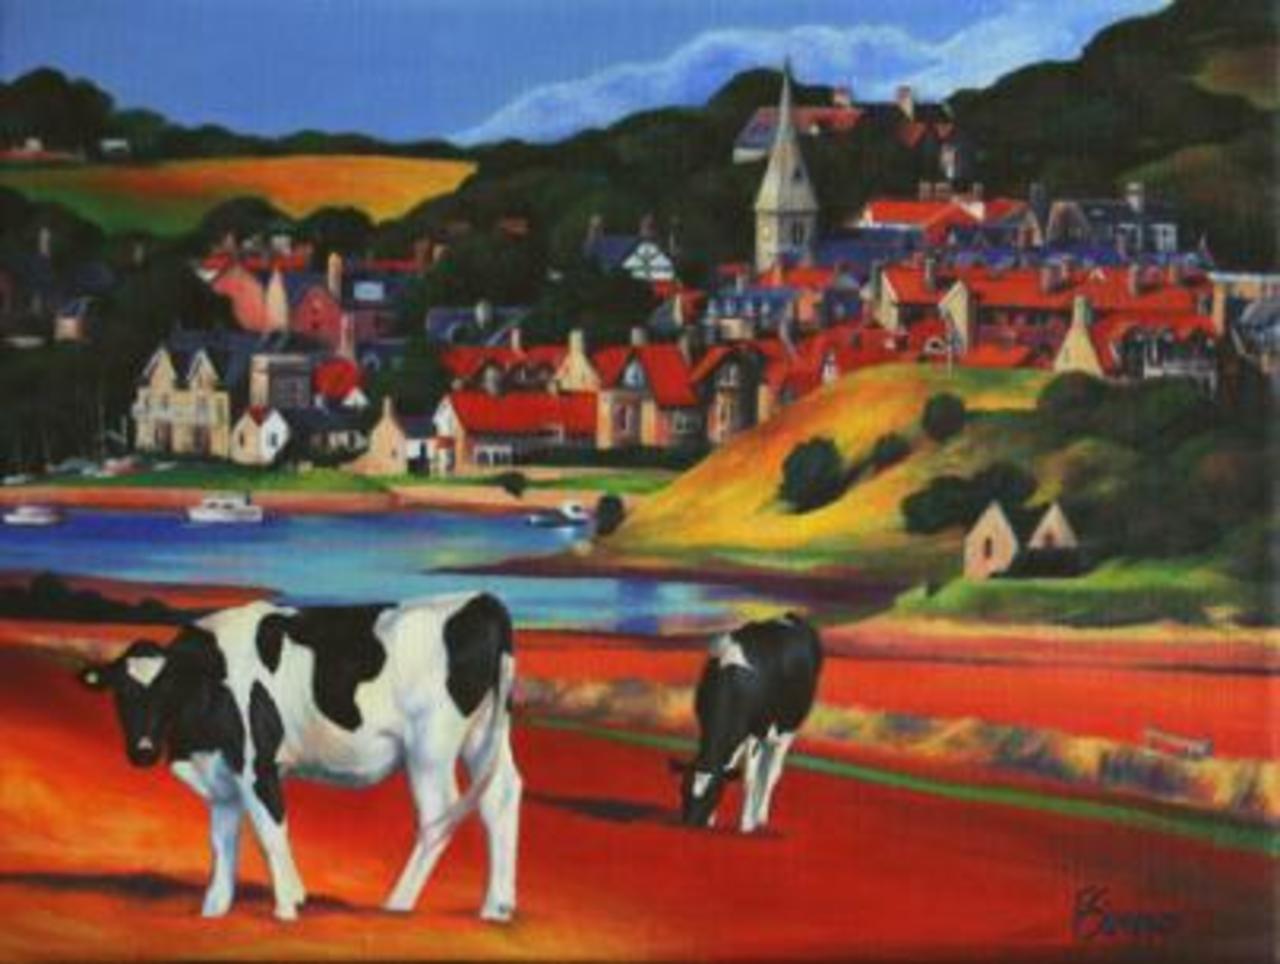 Stylized painting  - Alnmouth by Francesca Simpson http://bit.ly/1Qf5bGl #Art #Northumberland #Painting http://t.co/aAy7HVxRgB